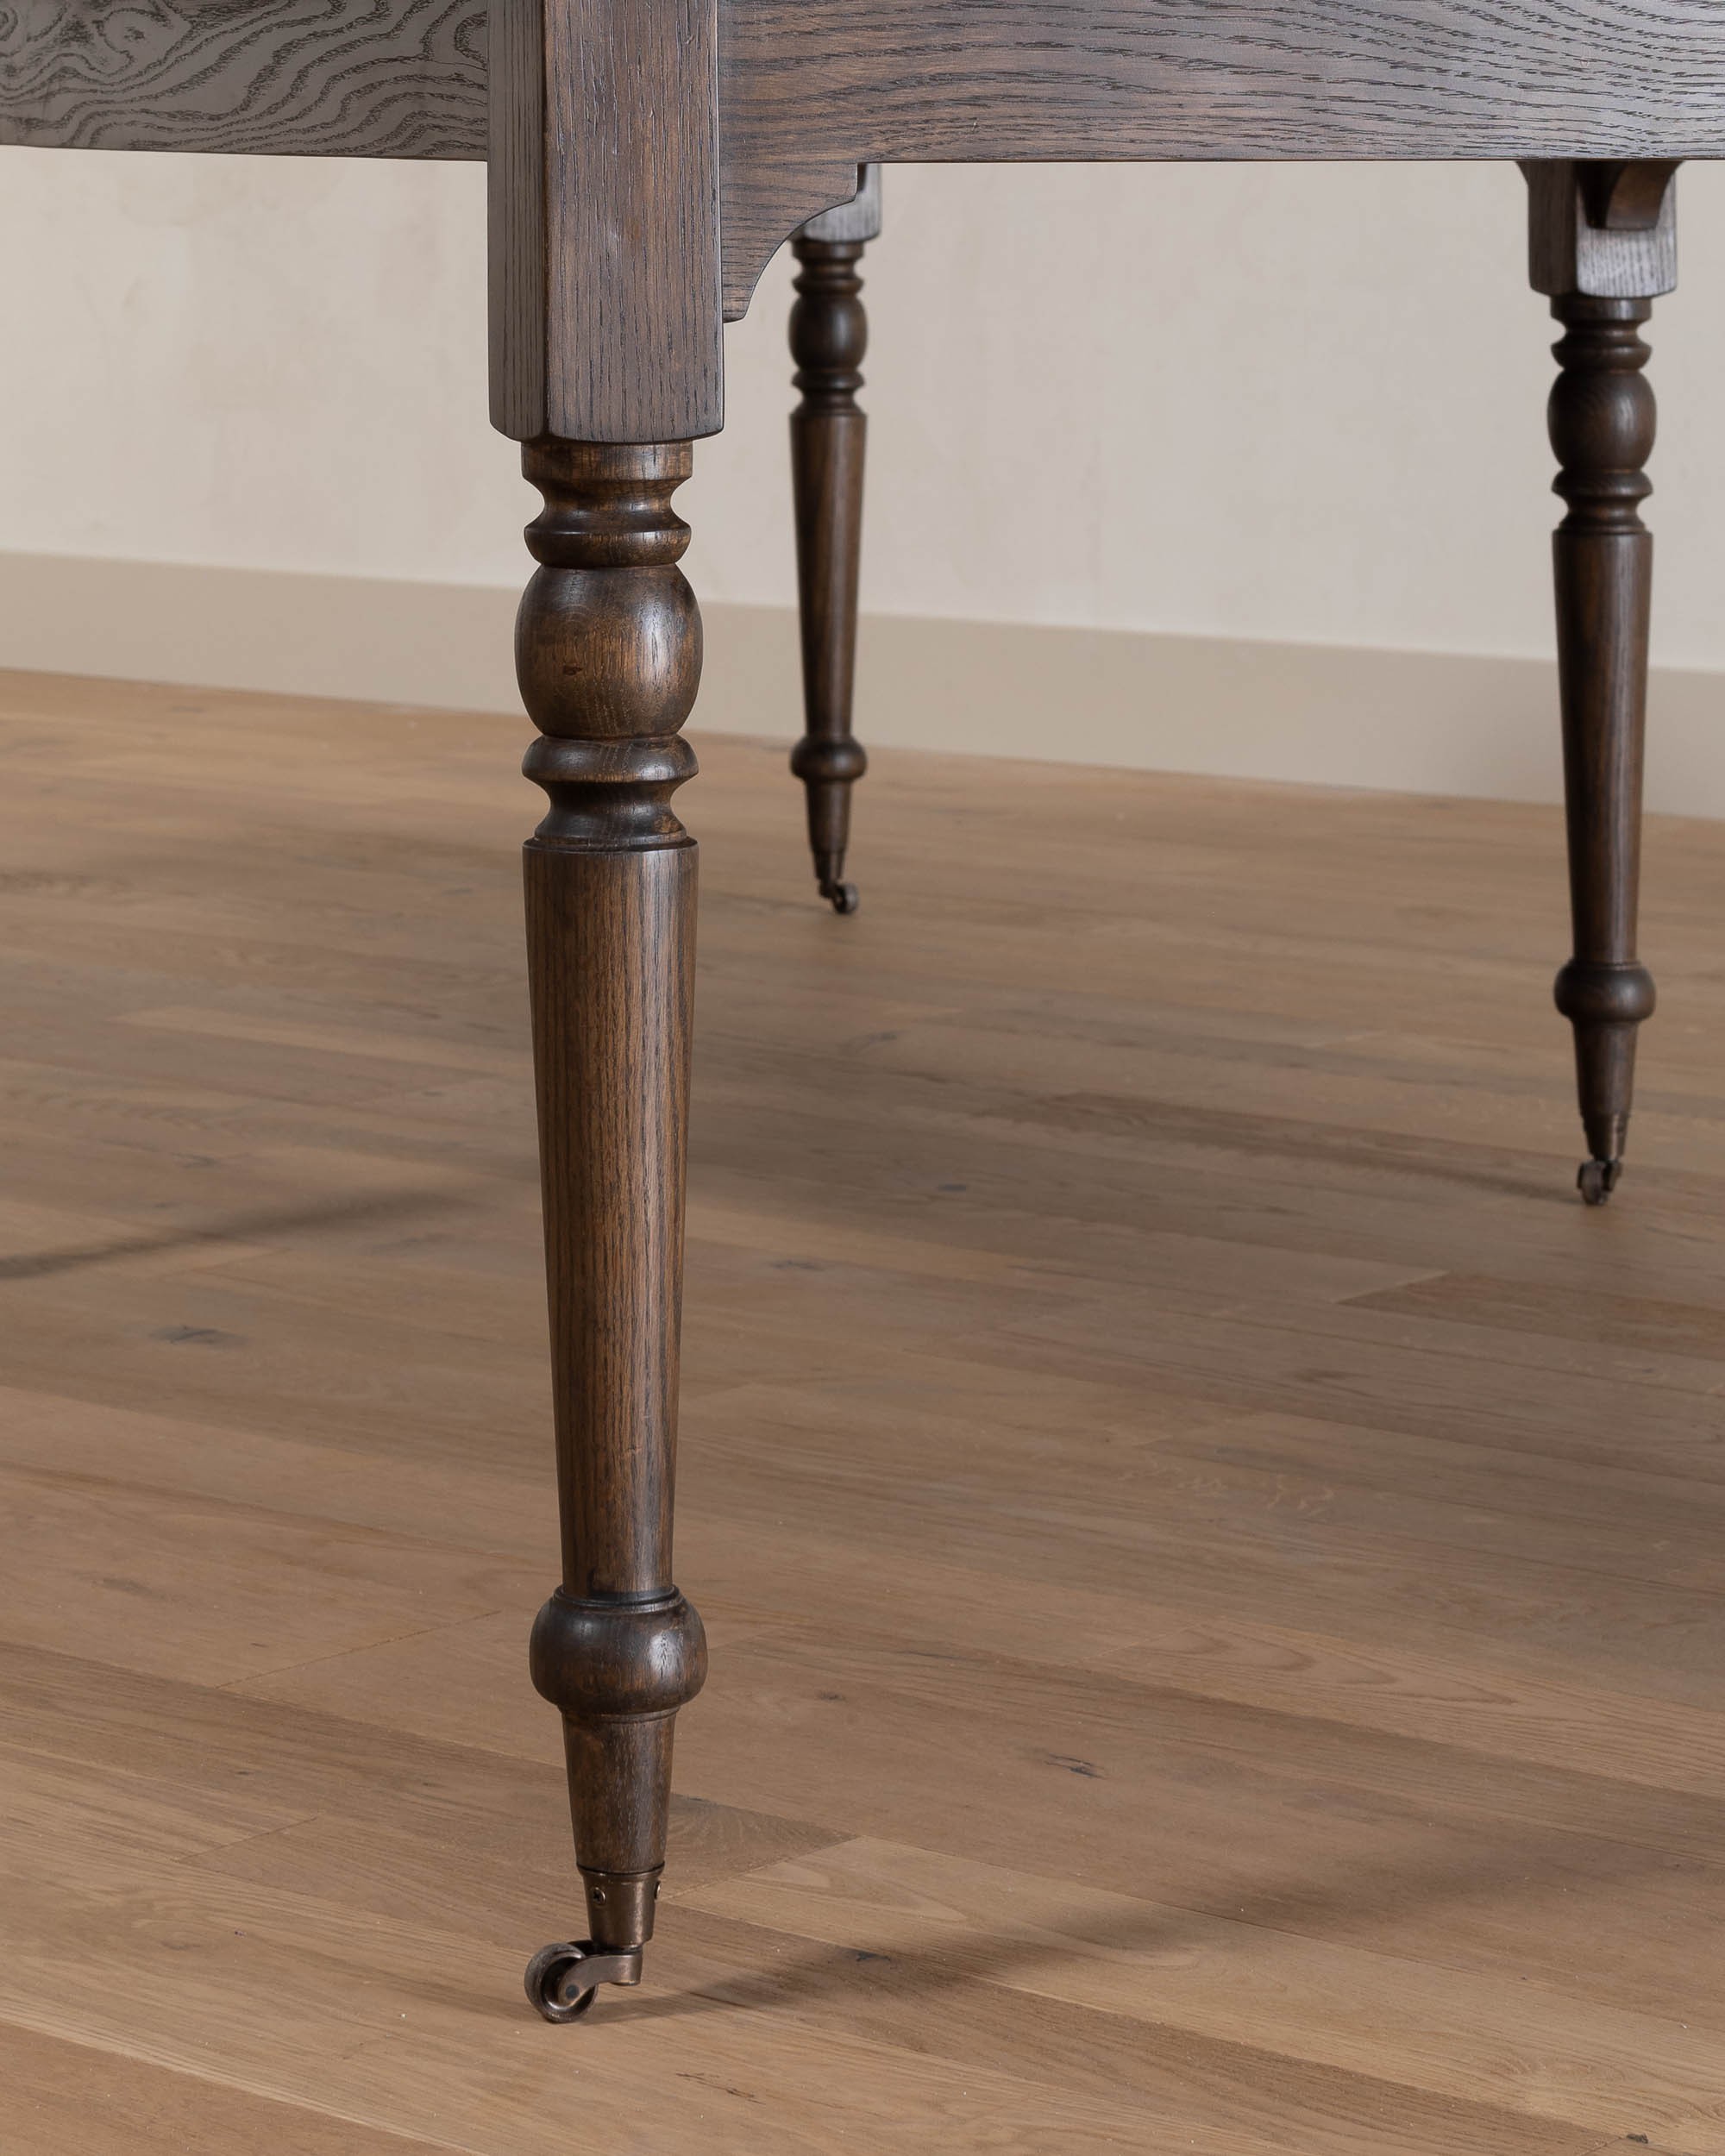 a close up of a wooden table on a hard wood floor